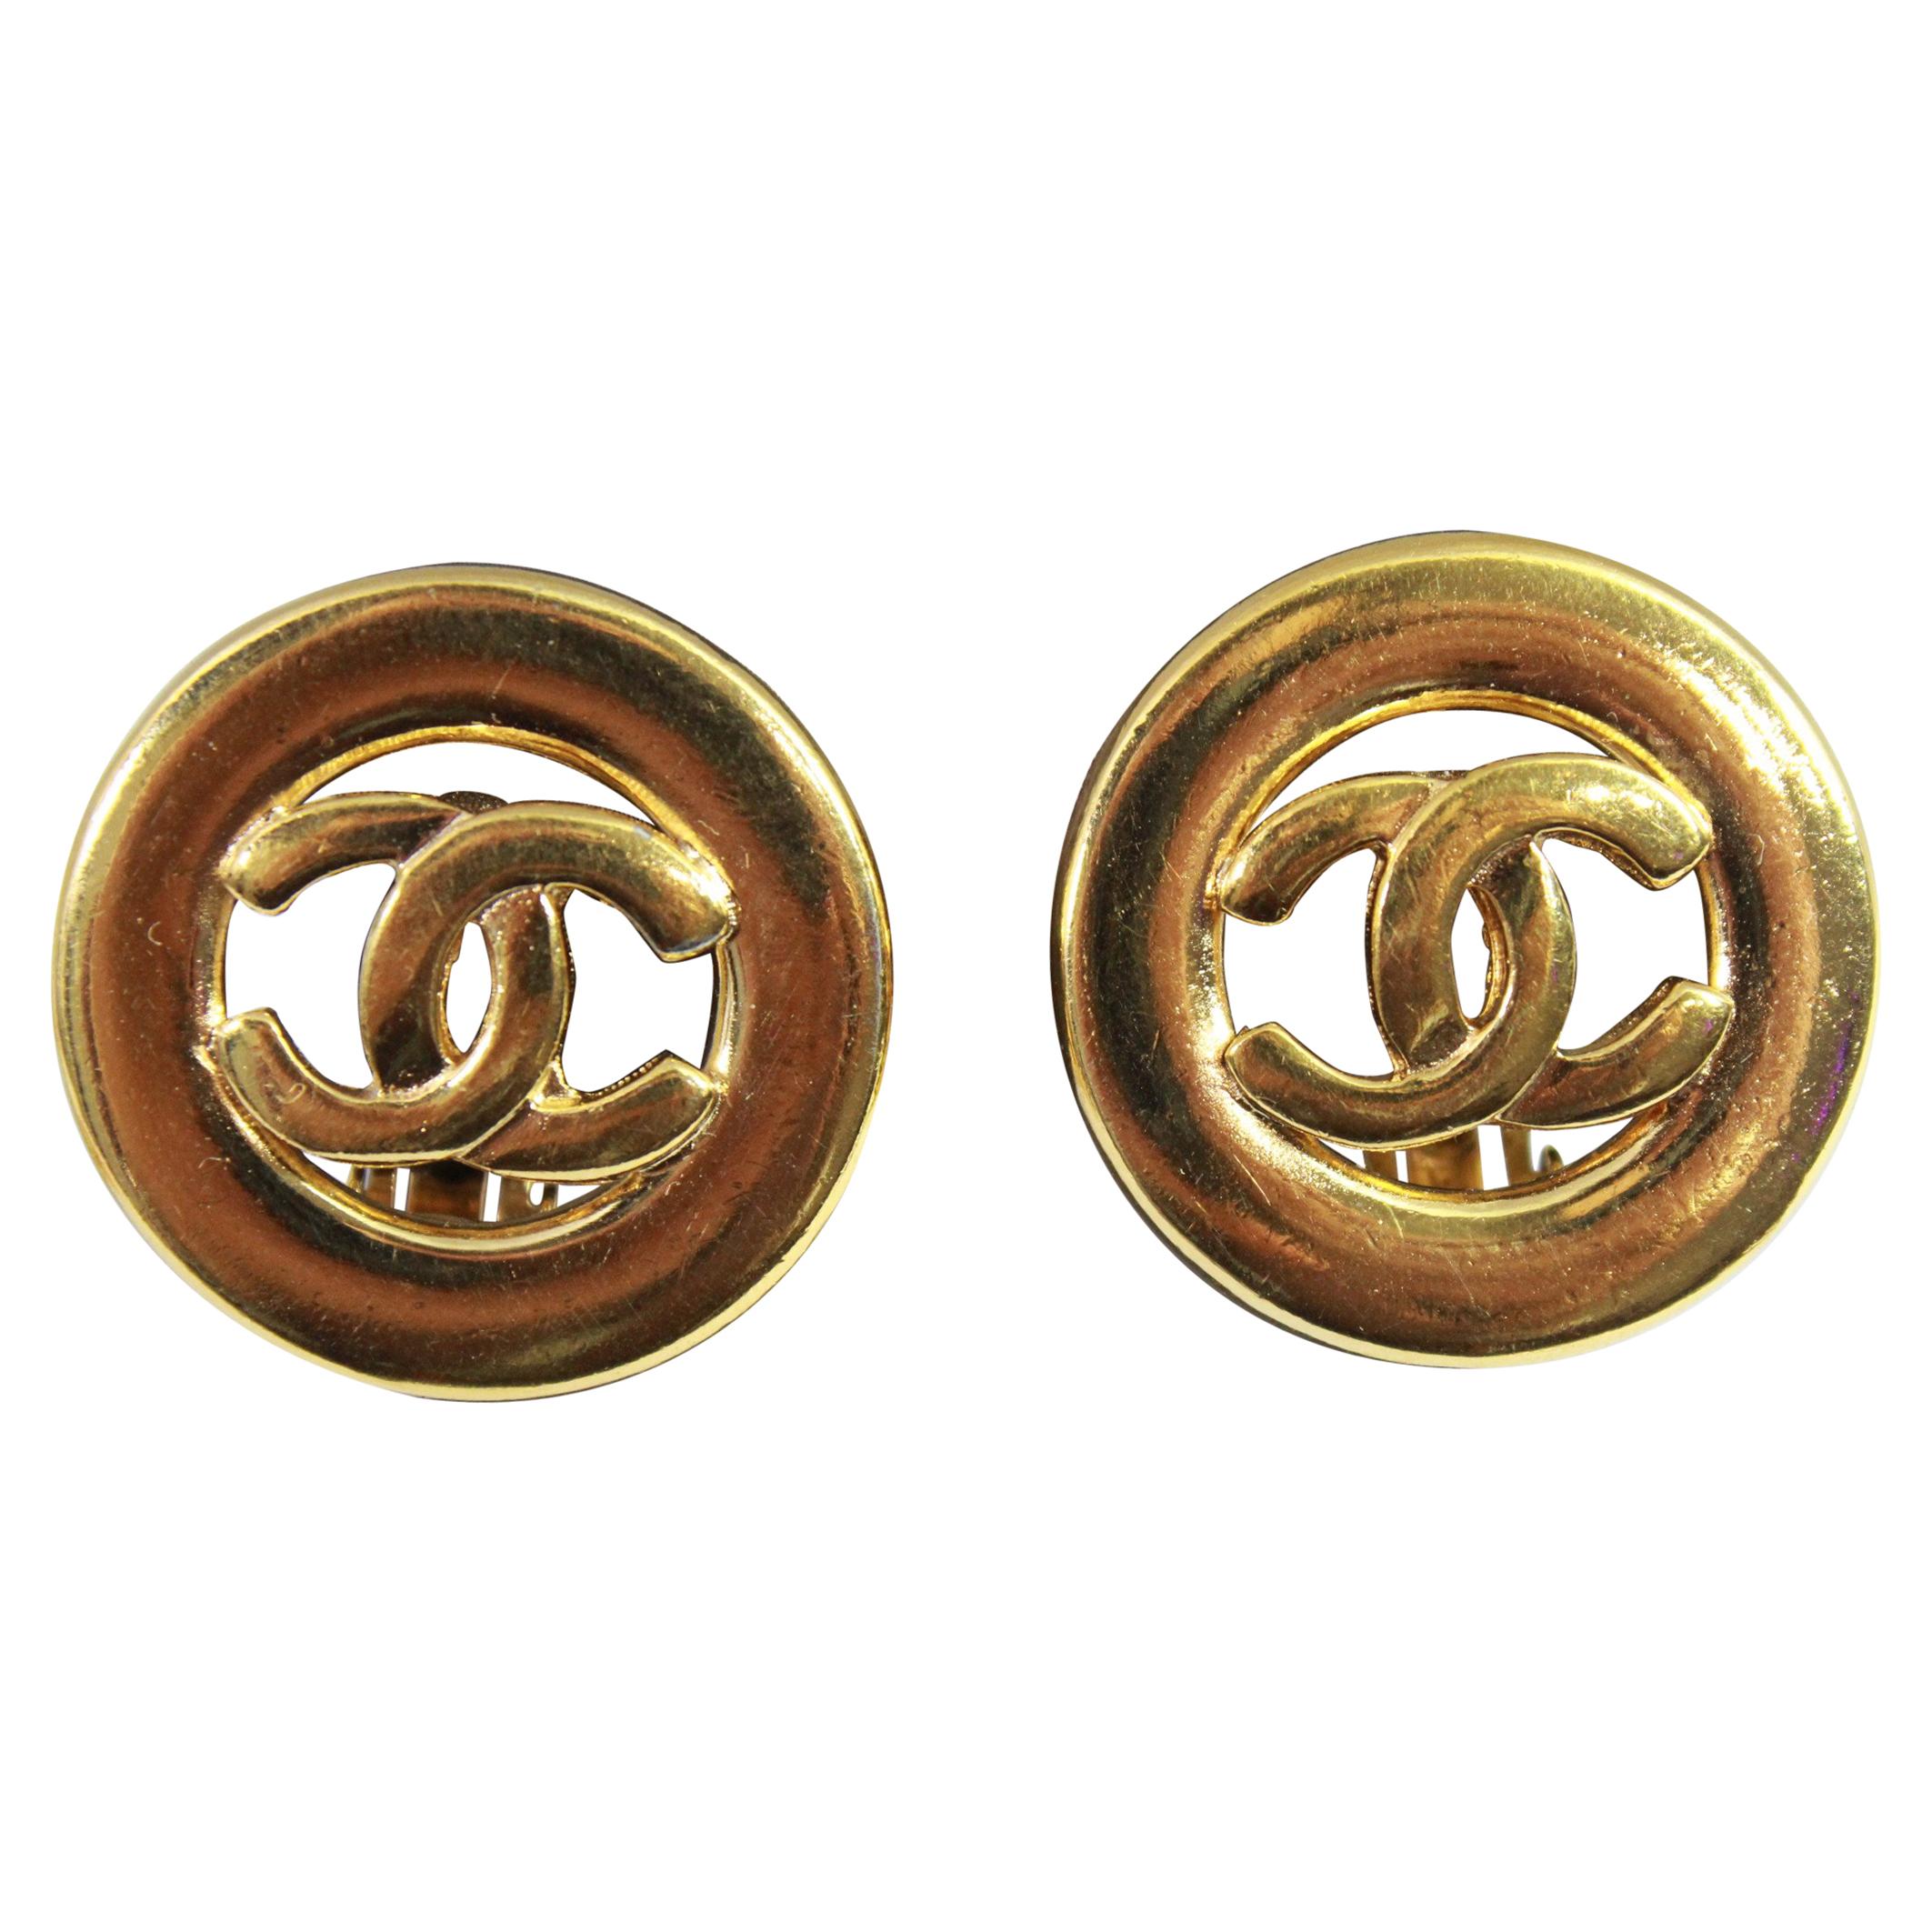 90's Chanel Vintage  Logo Earrings in Gold-Plated Metal